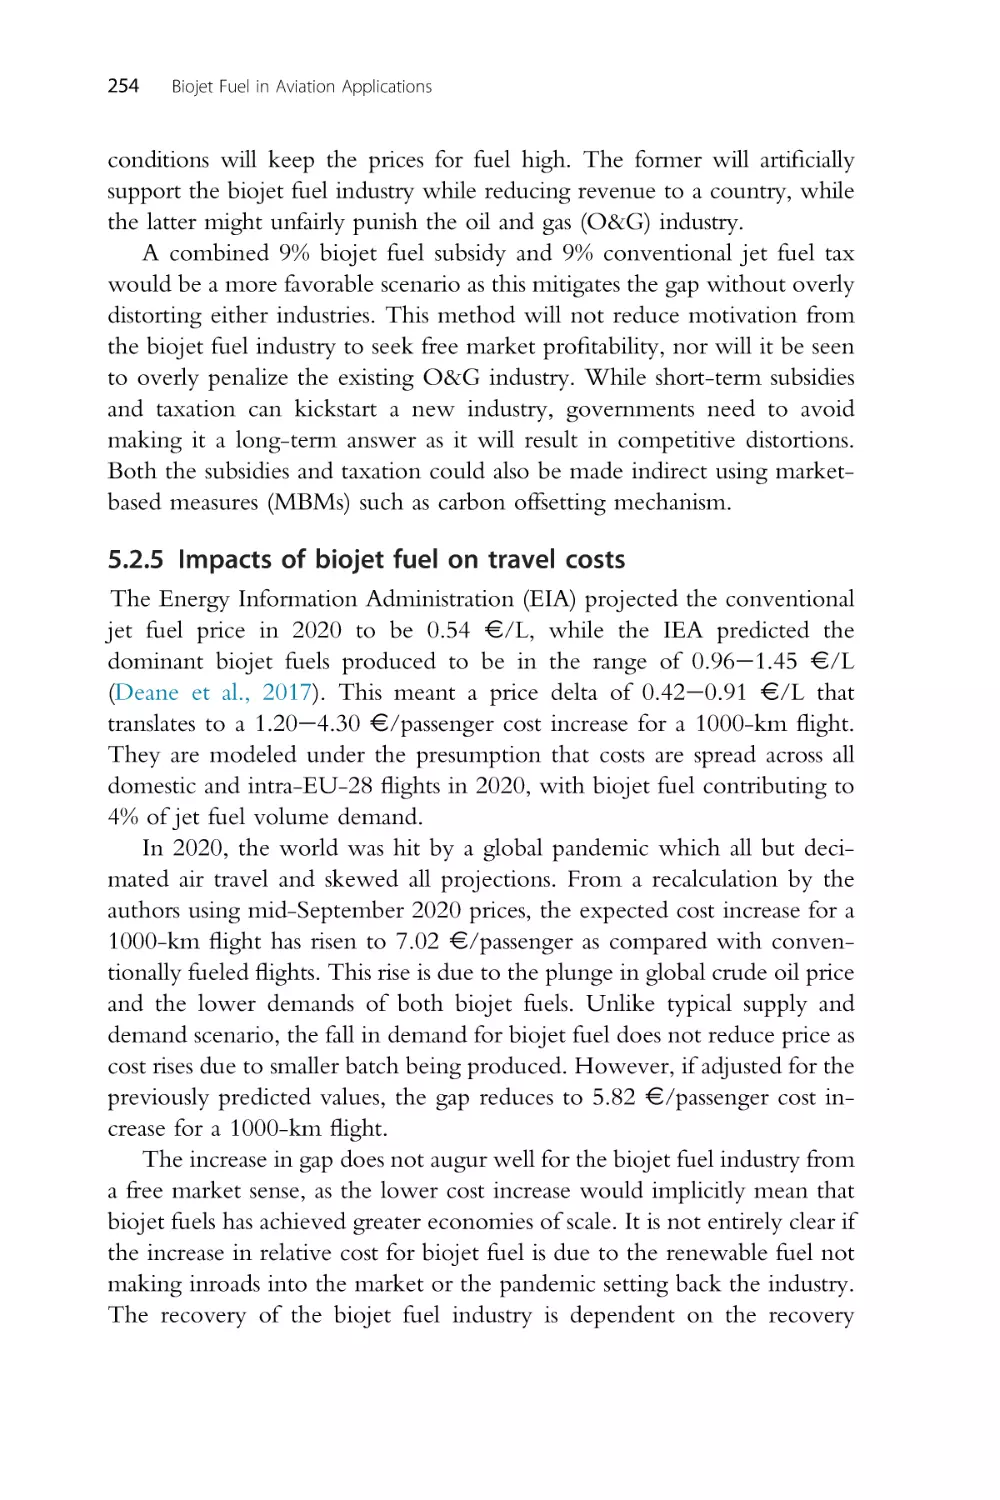 5.2.5 Impacts of biojet fuel on travel costs